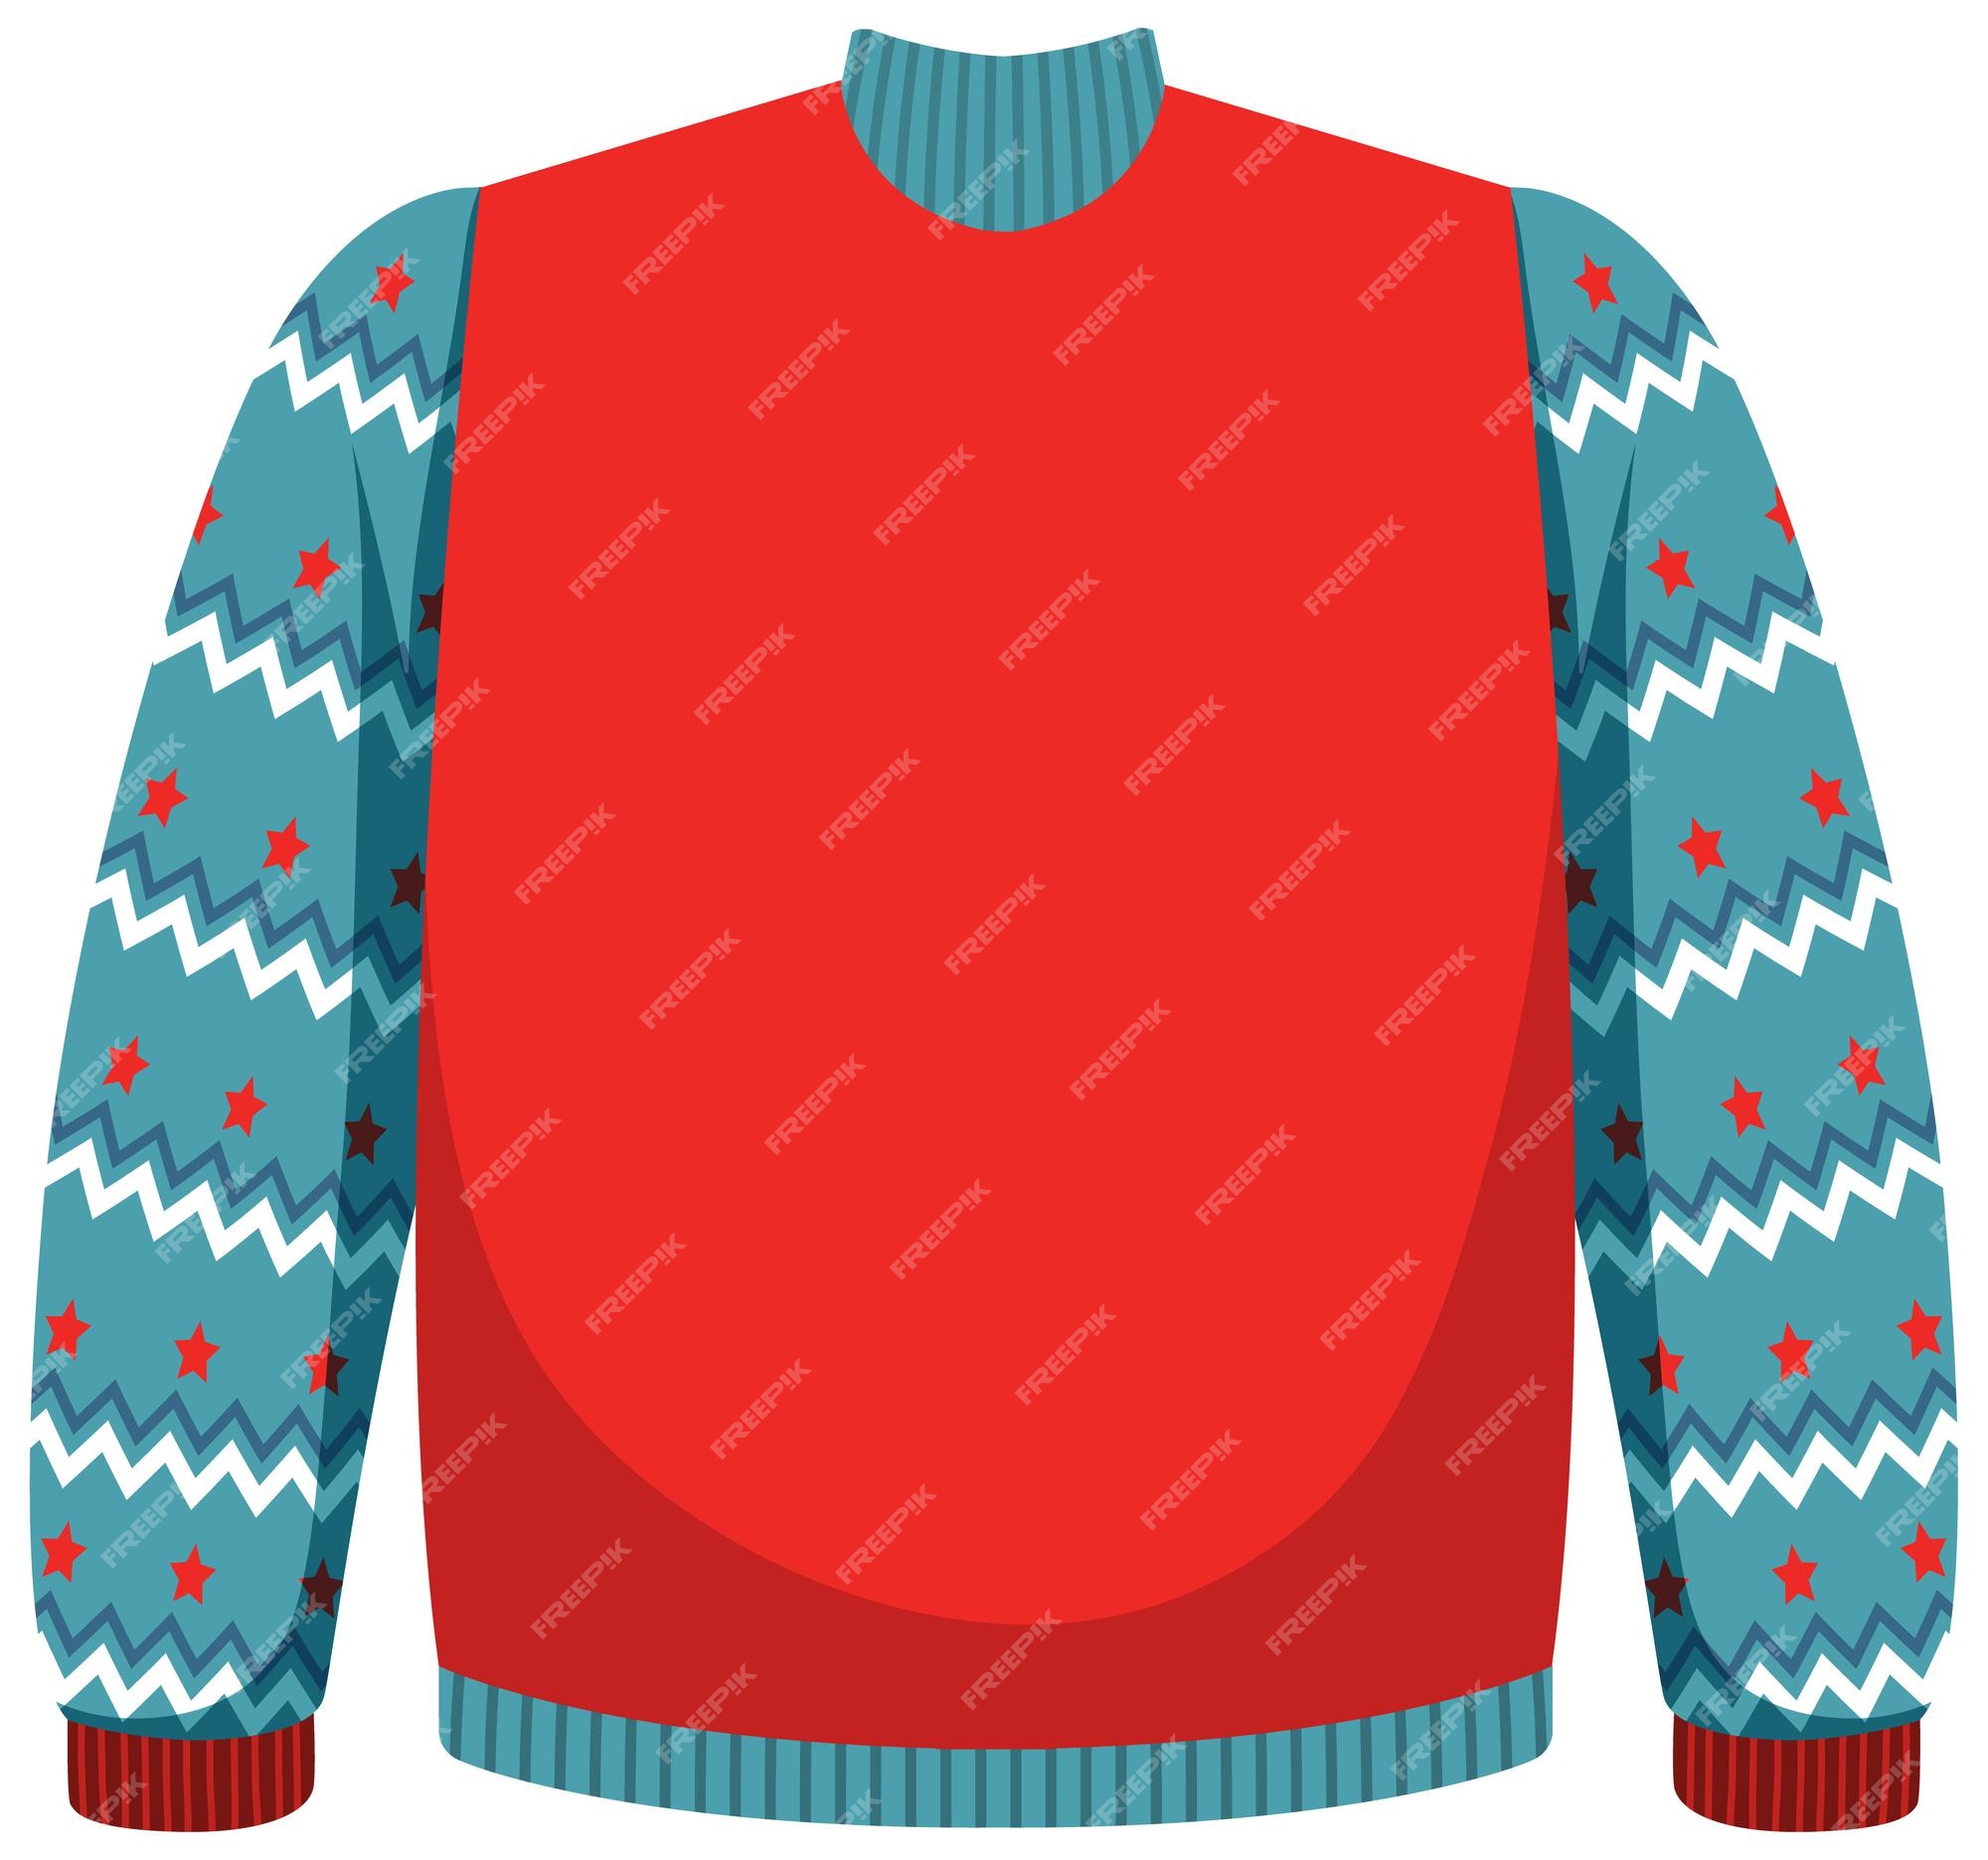 Premium Vector | Christmas sweater in cartoon style isolated